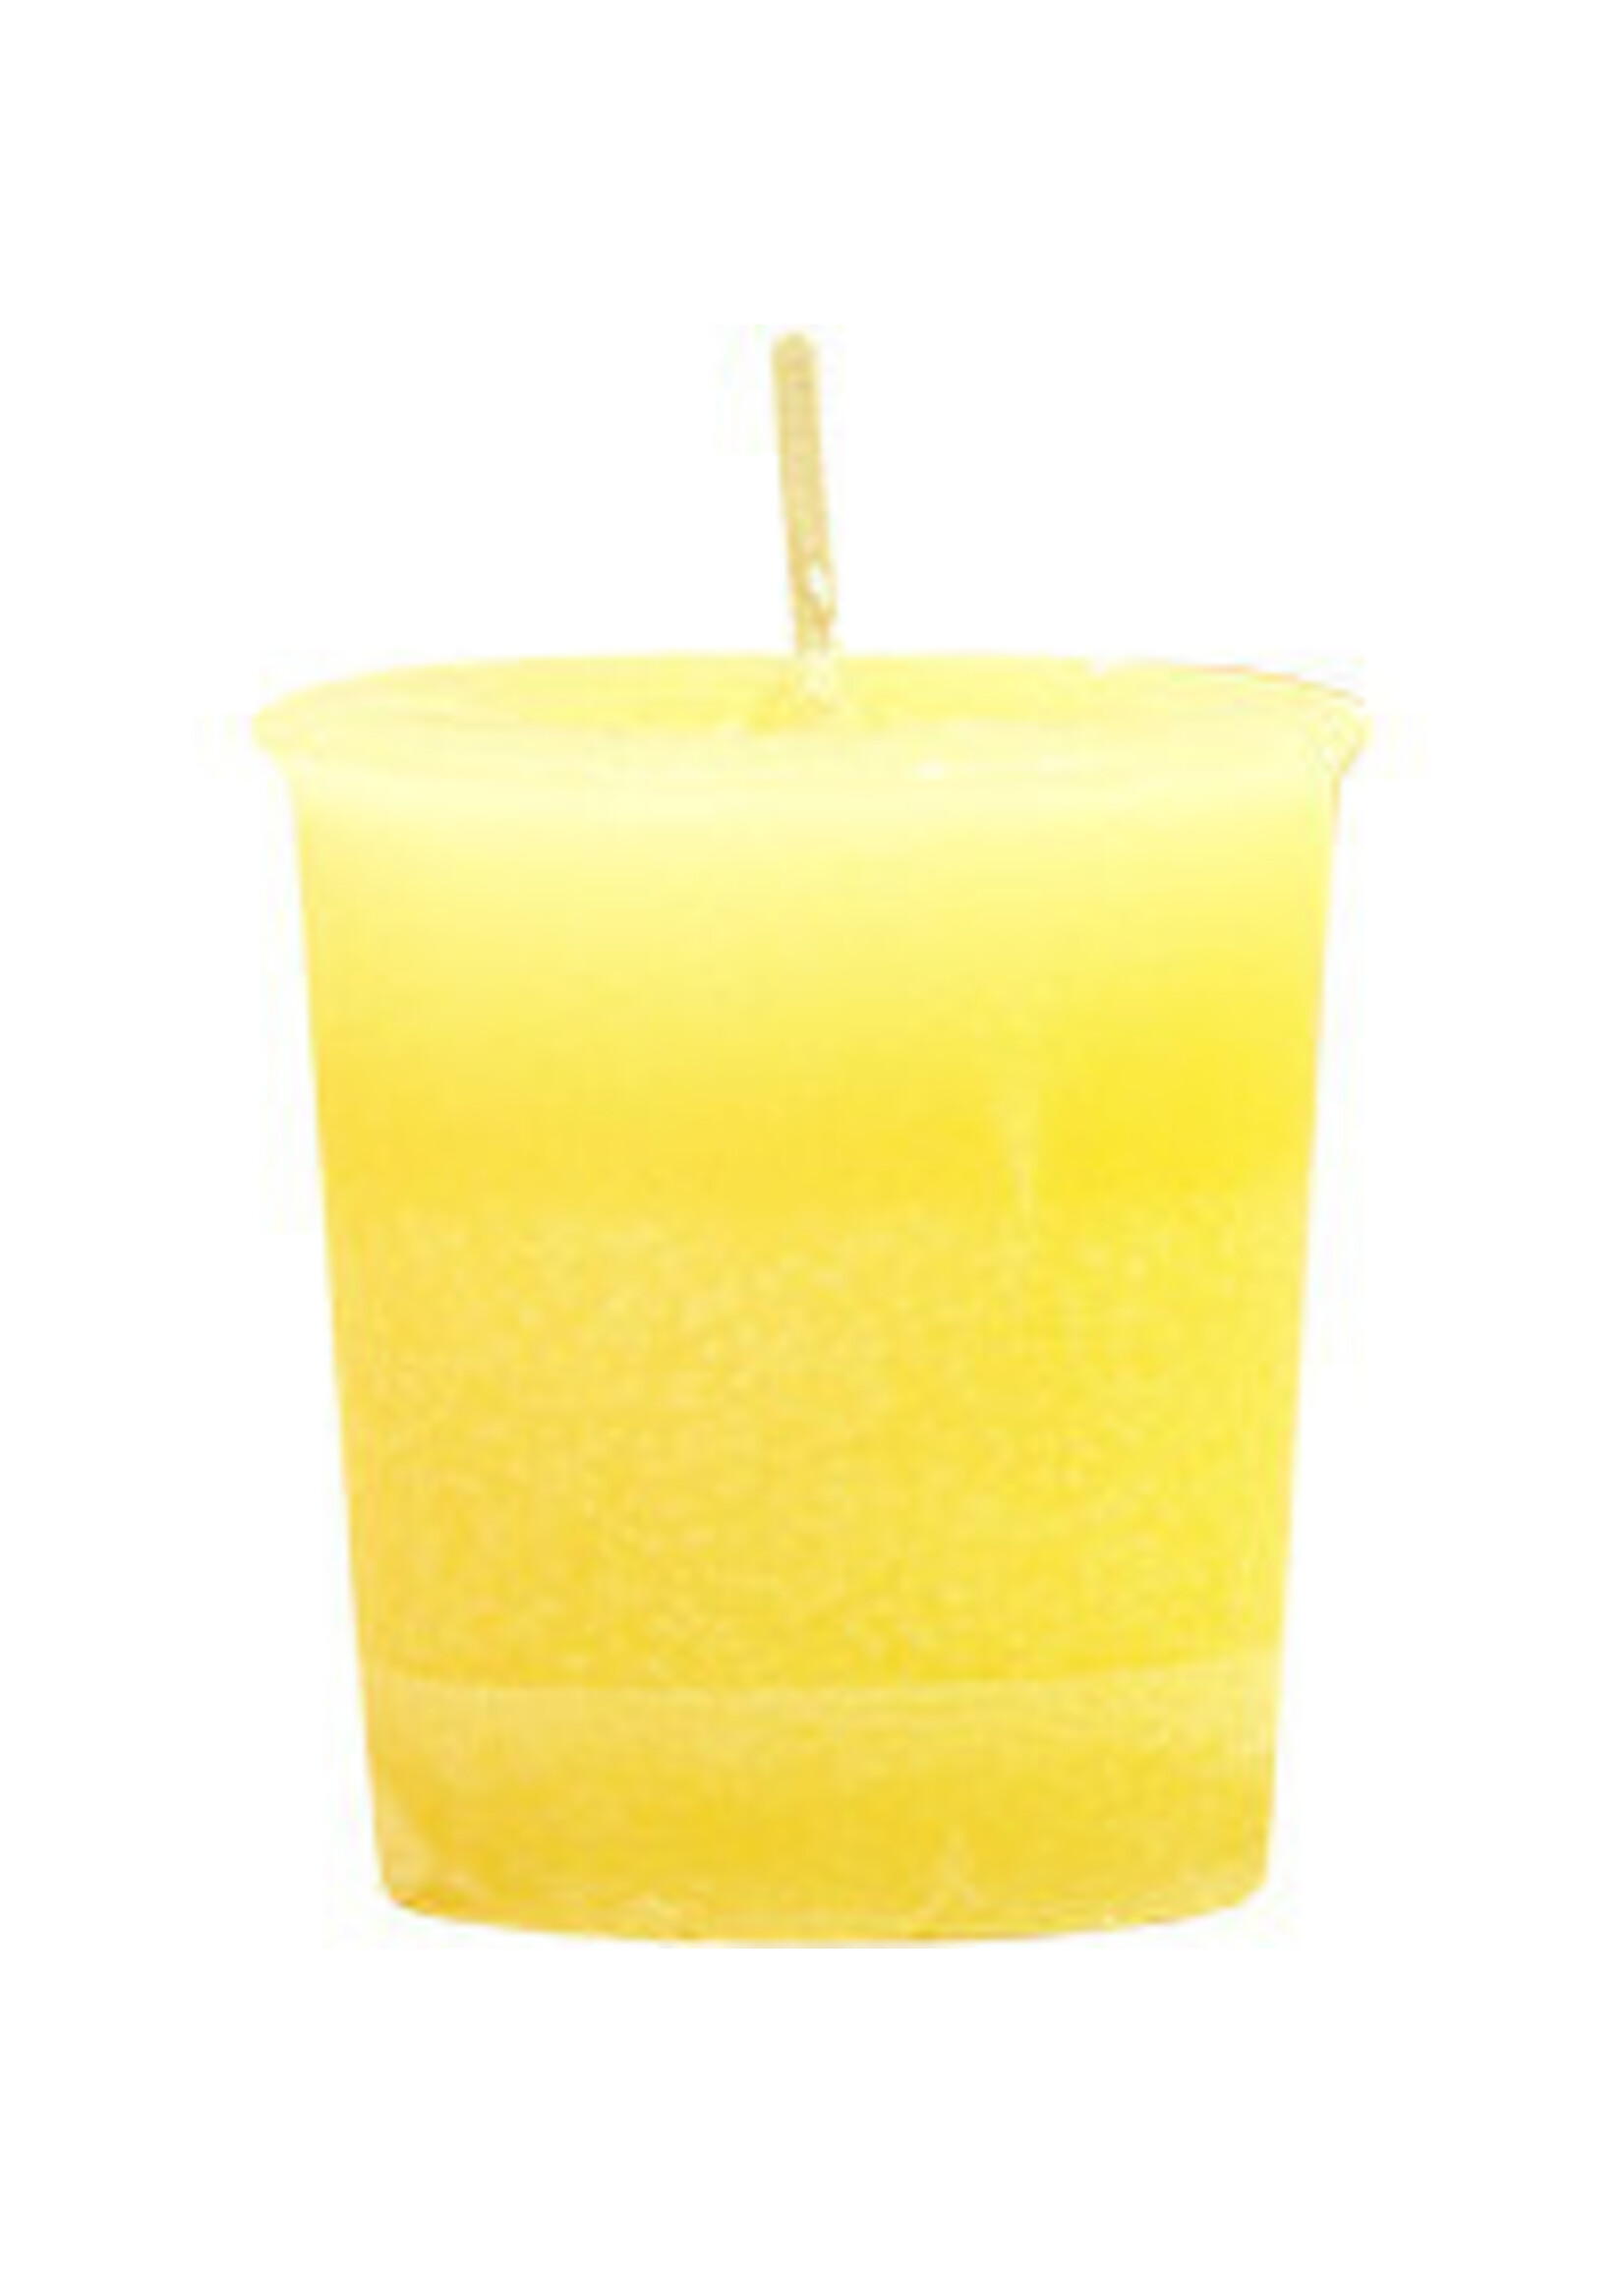 Reiki Charged Herbal Candles Parrafin 2" Votive Candle Positive Energy